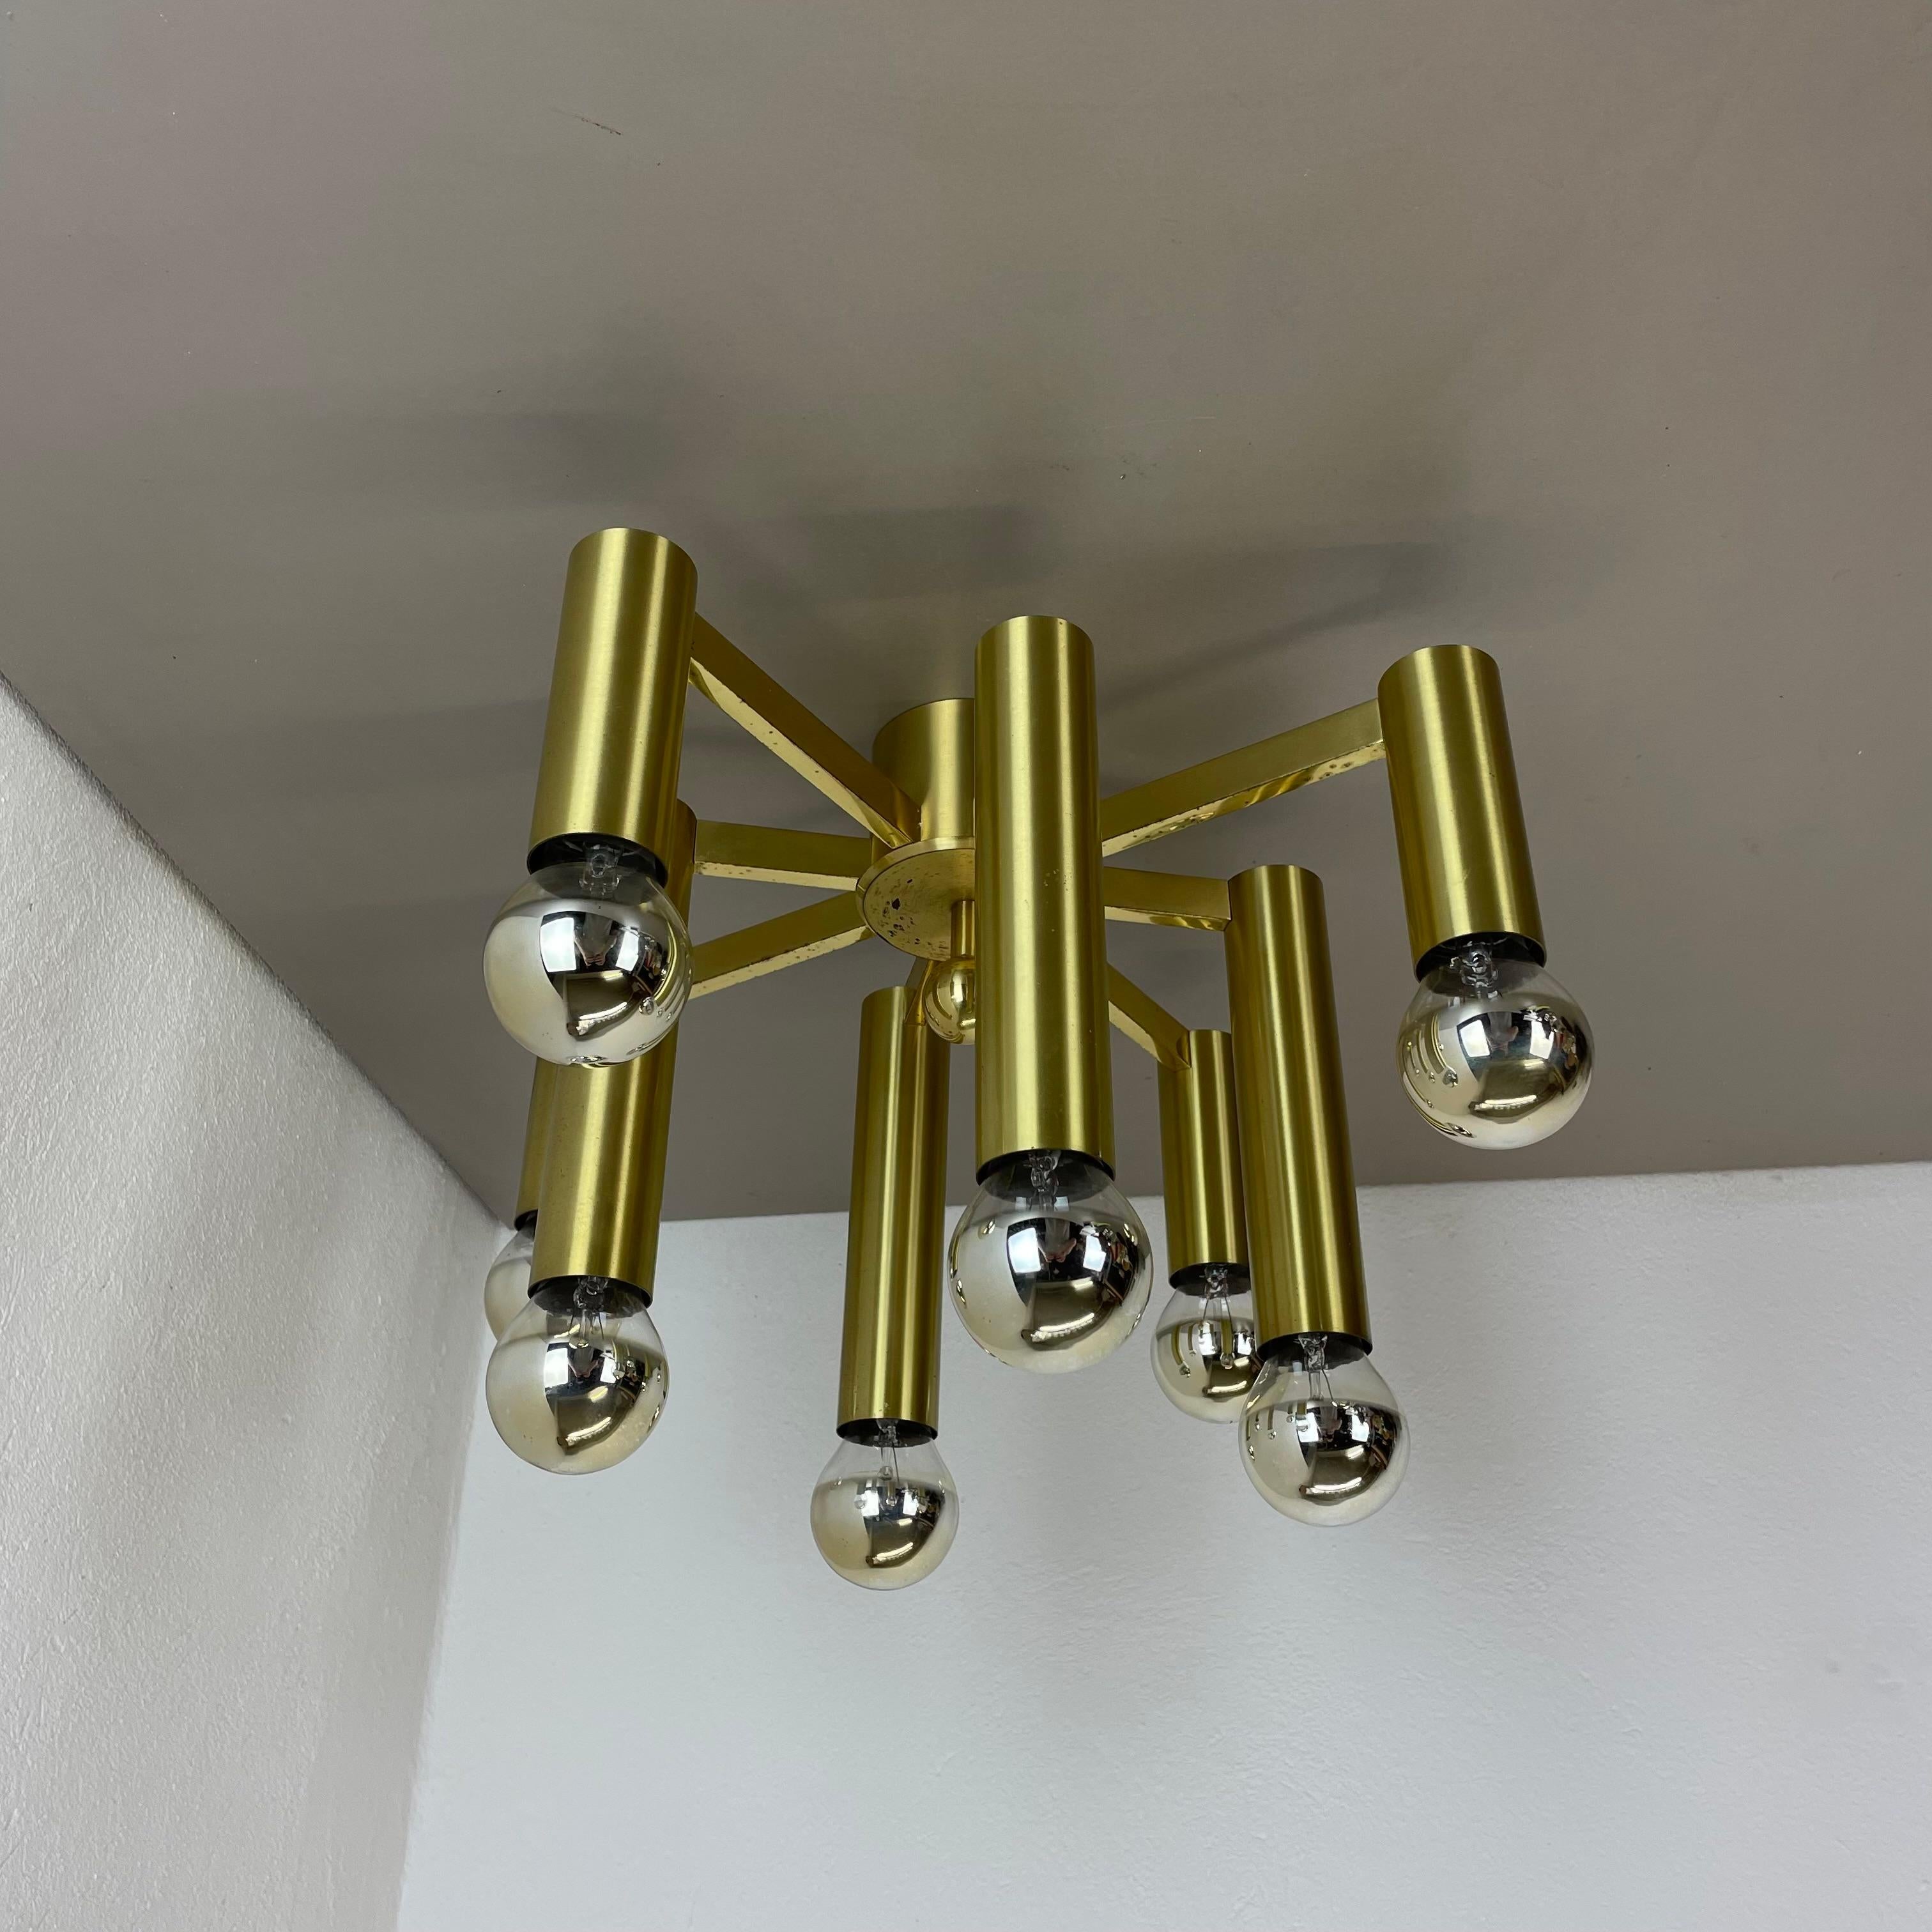 Article:

brass ceiling light, flush mount



Origin:

Italy



Age:

1960s




This vintage modernist ceiling light was produced in the 1960s in Italy. The lights is made of solid brass and has a fantastic tube structure with sockets for light